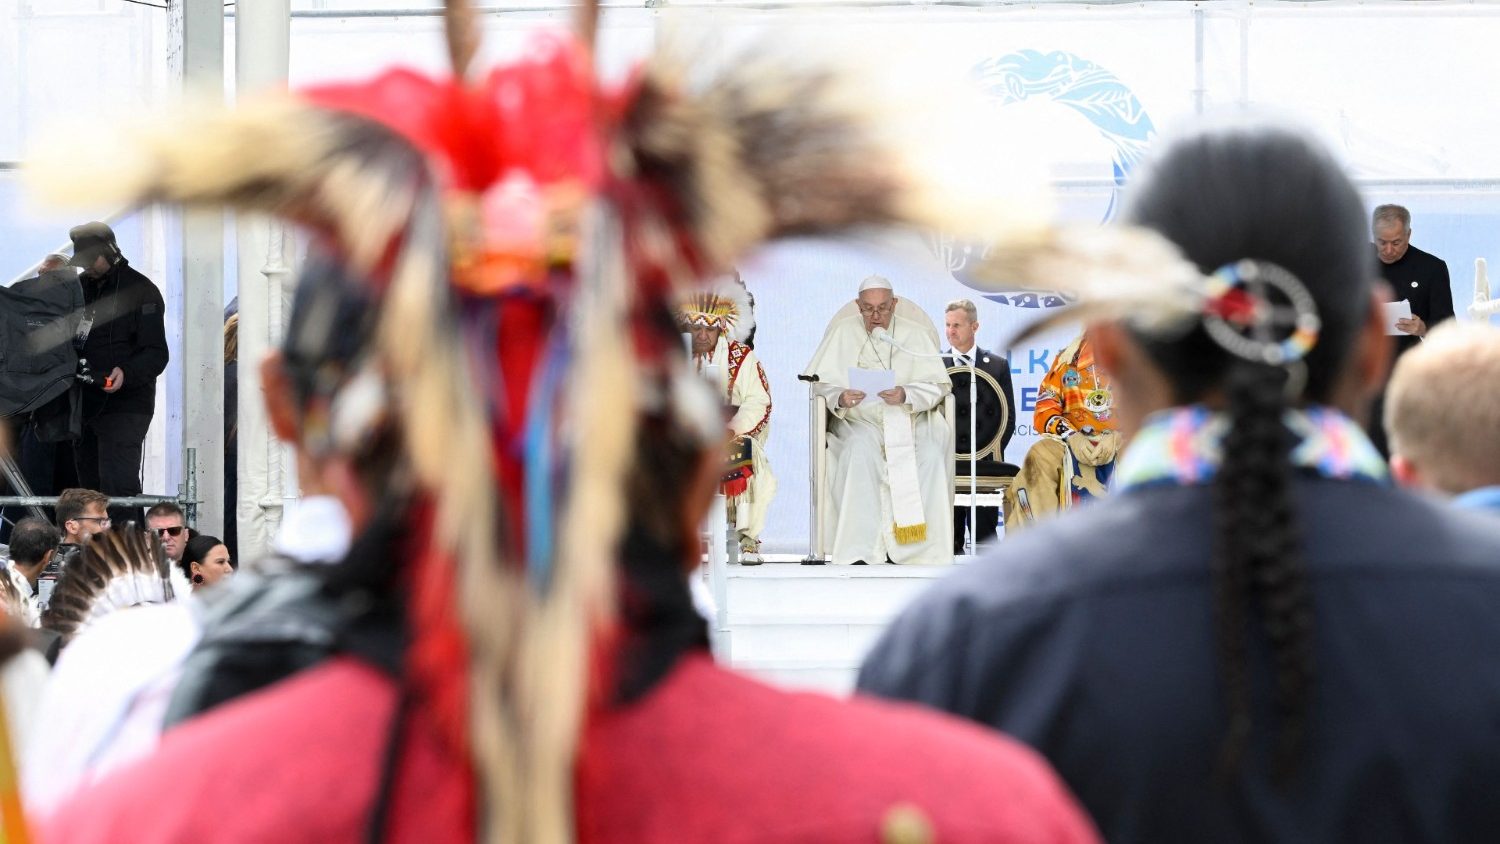 Holy See highlights Indigenous youth as guardians of culture - Vatican News